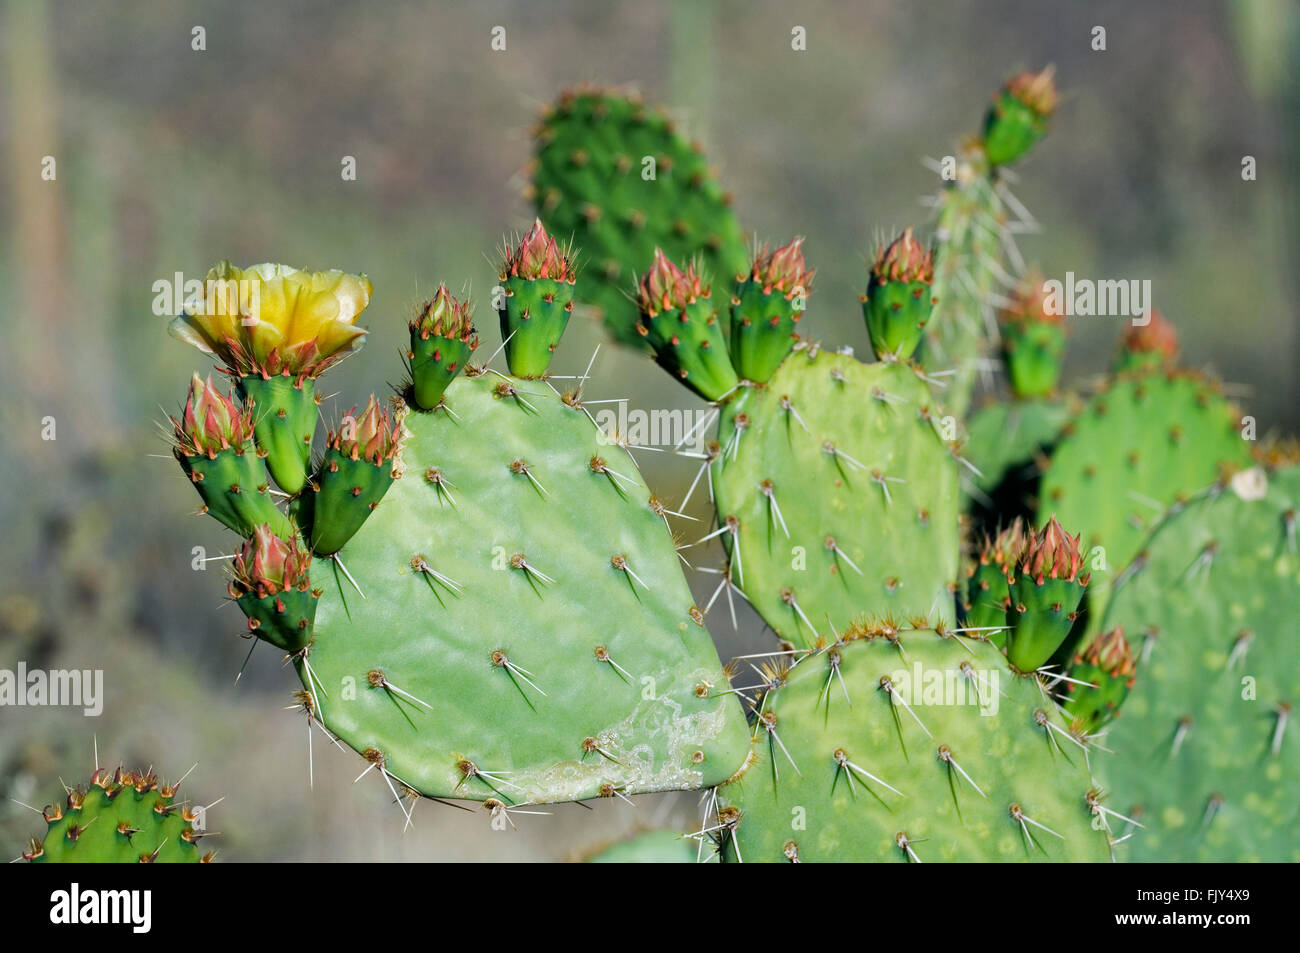 Engelmann's prickly pear / cow's tongue cactus (Opuntia engelmannii) pads in flower in spring, Sonoran desert, Arizona, USA Stock Photo